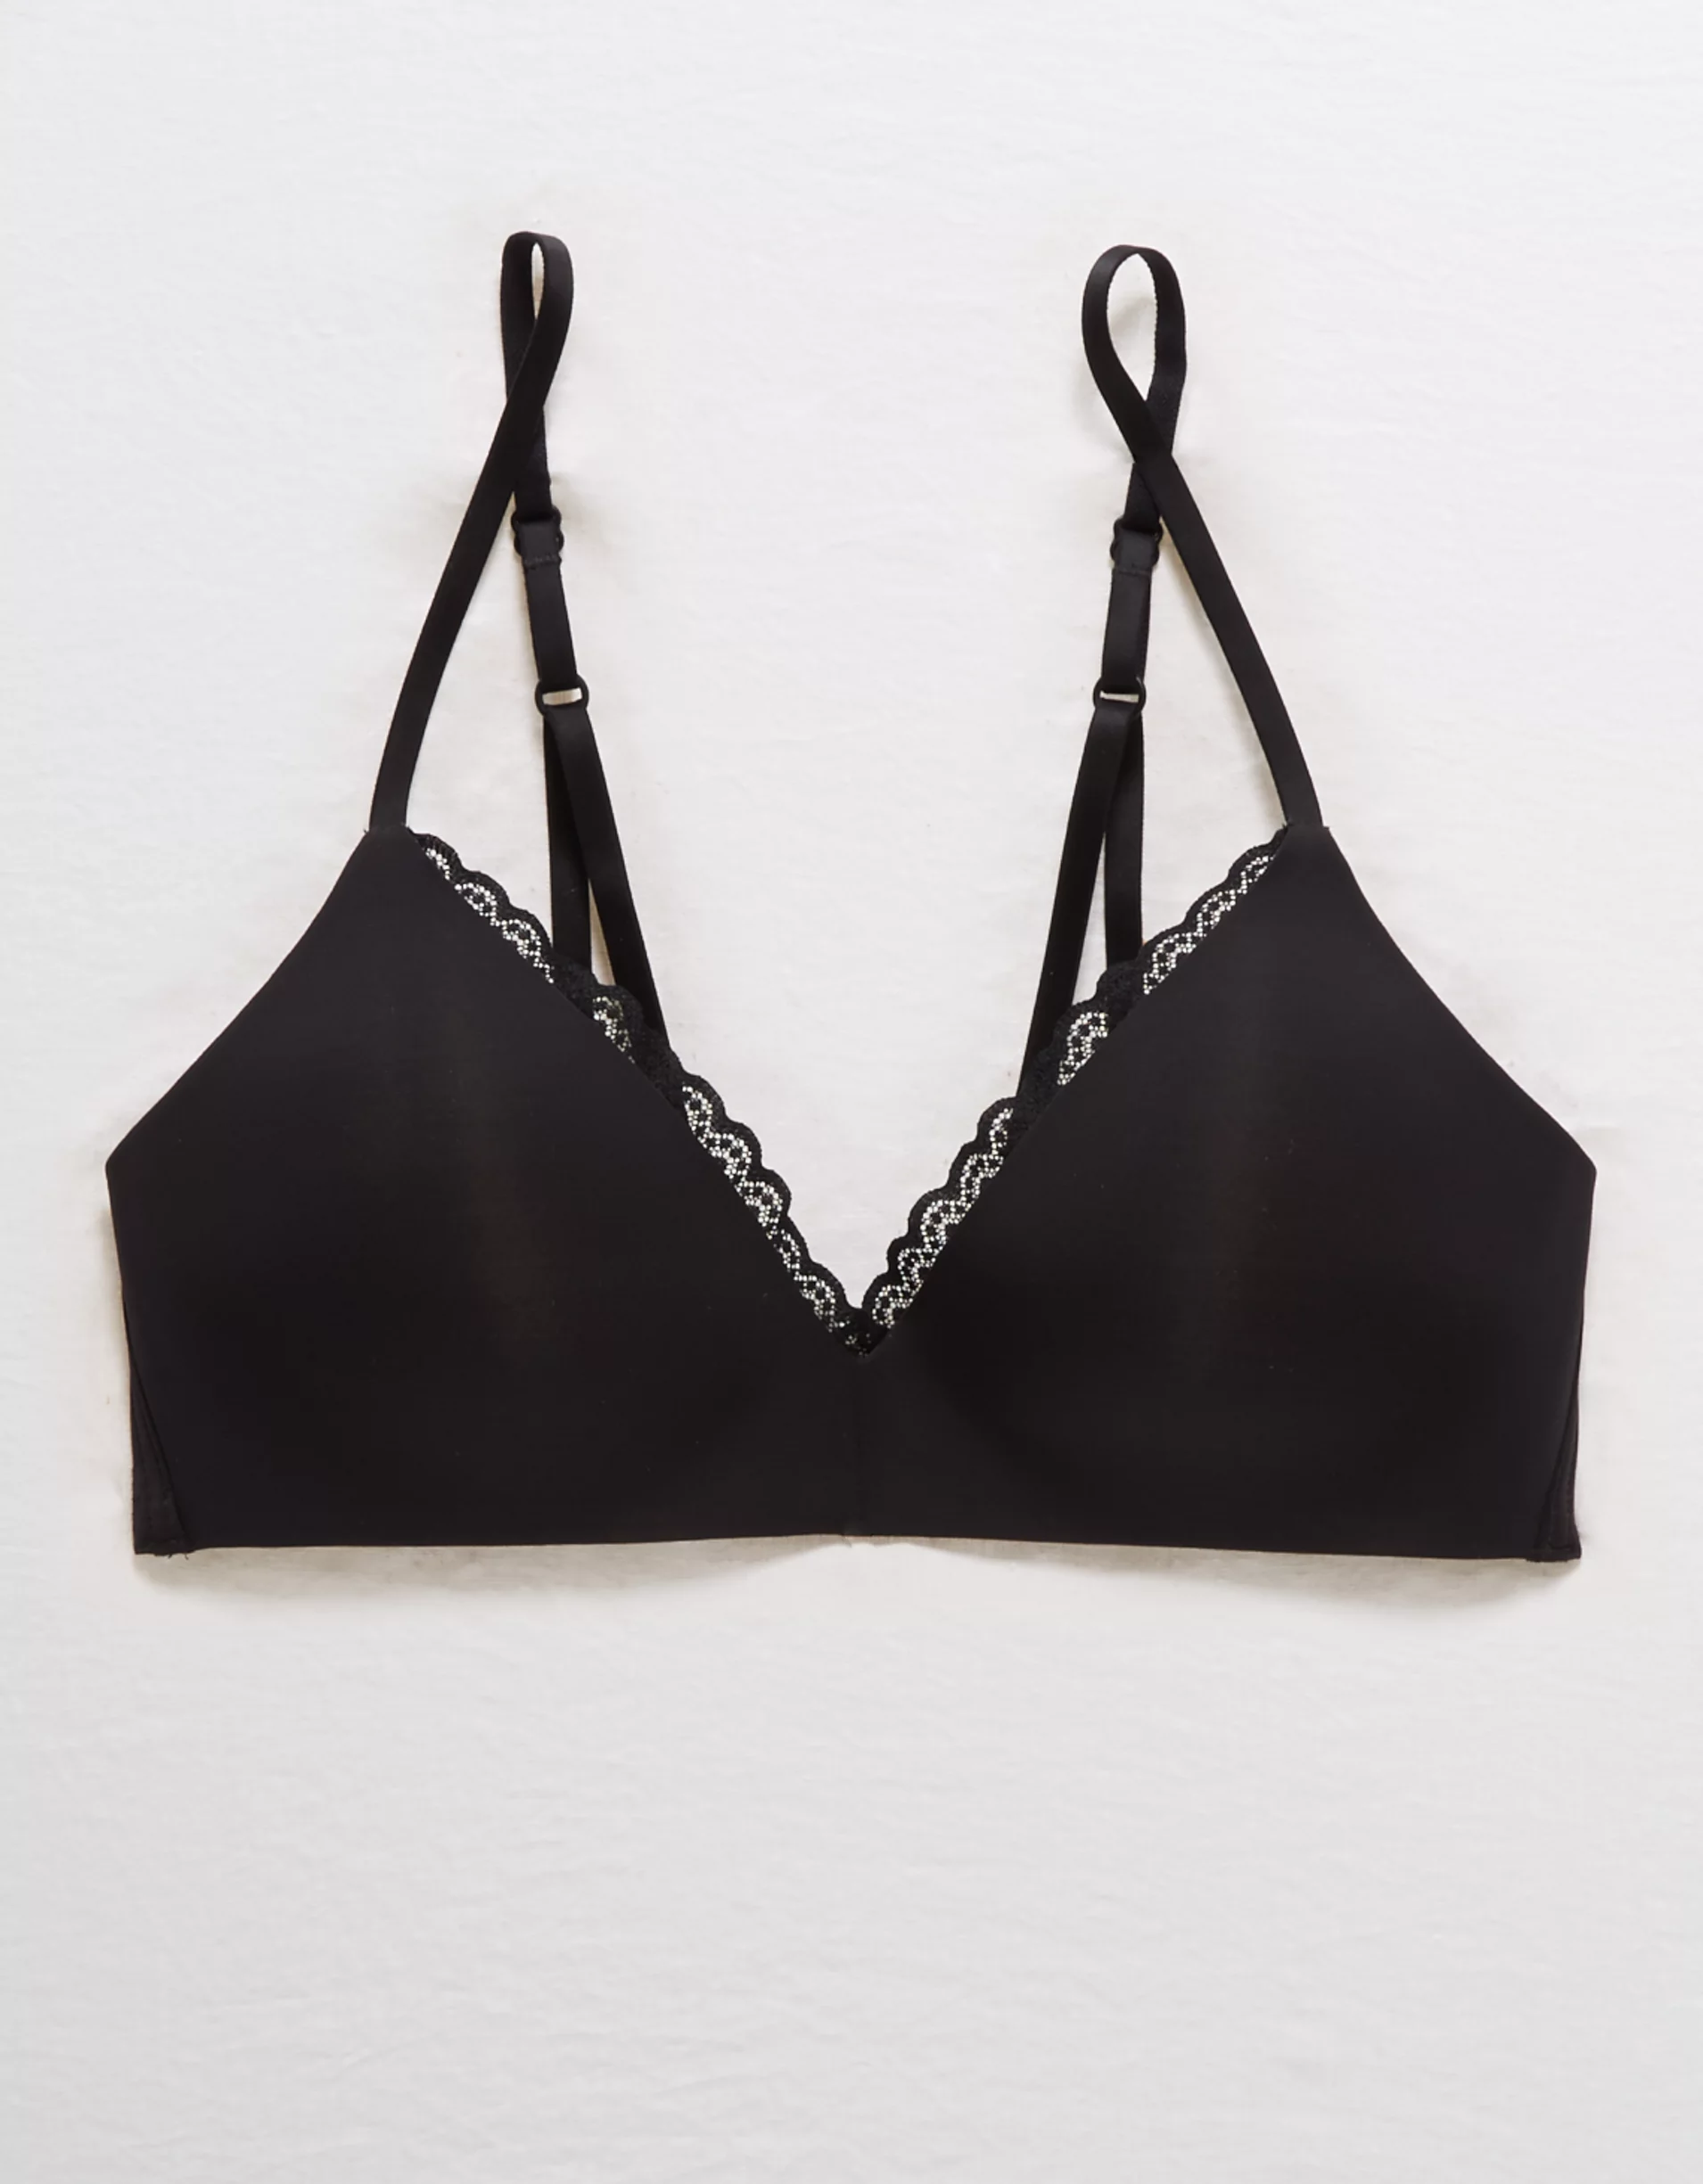 How to Choose the Right Bra for Your Budget: Tips and Tricks